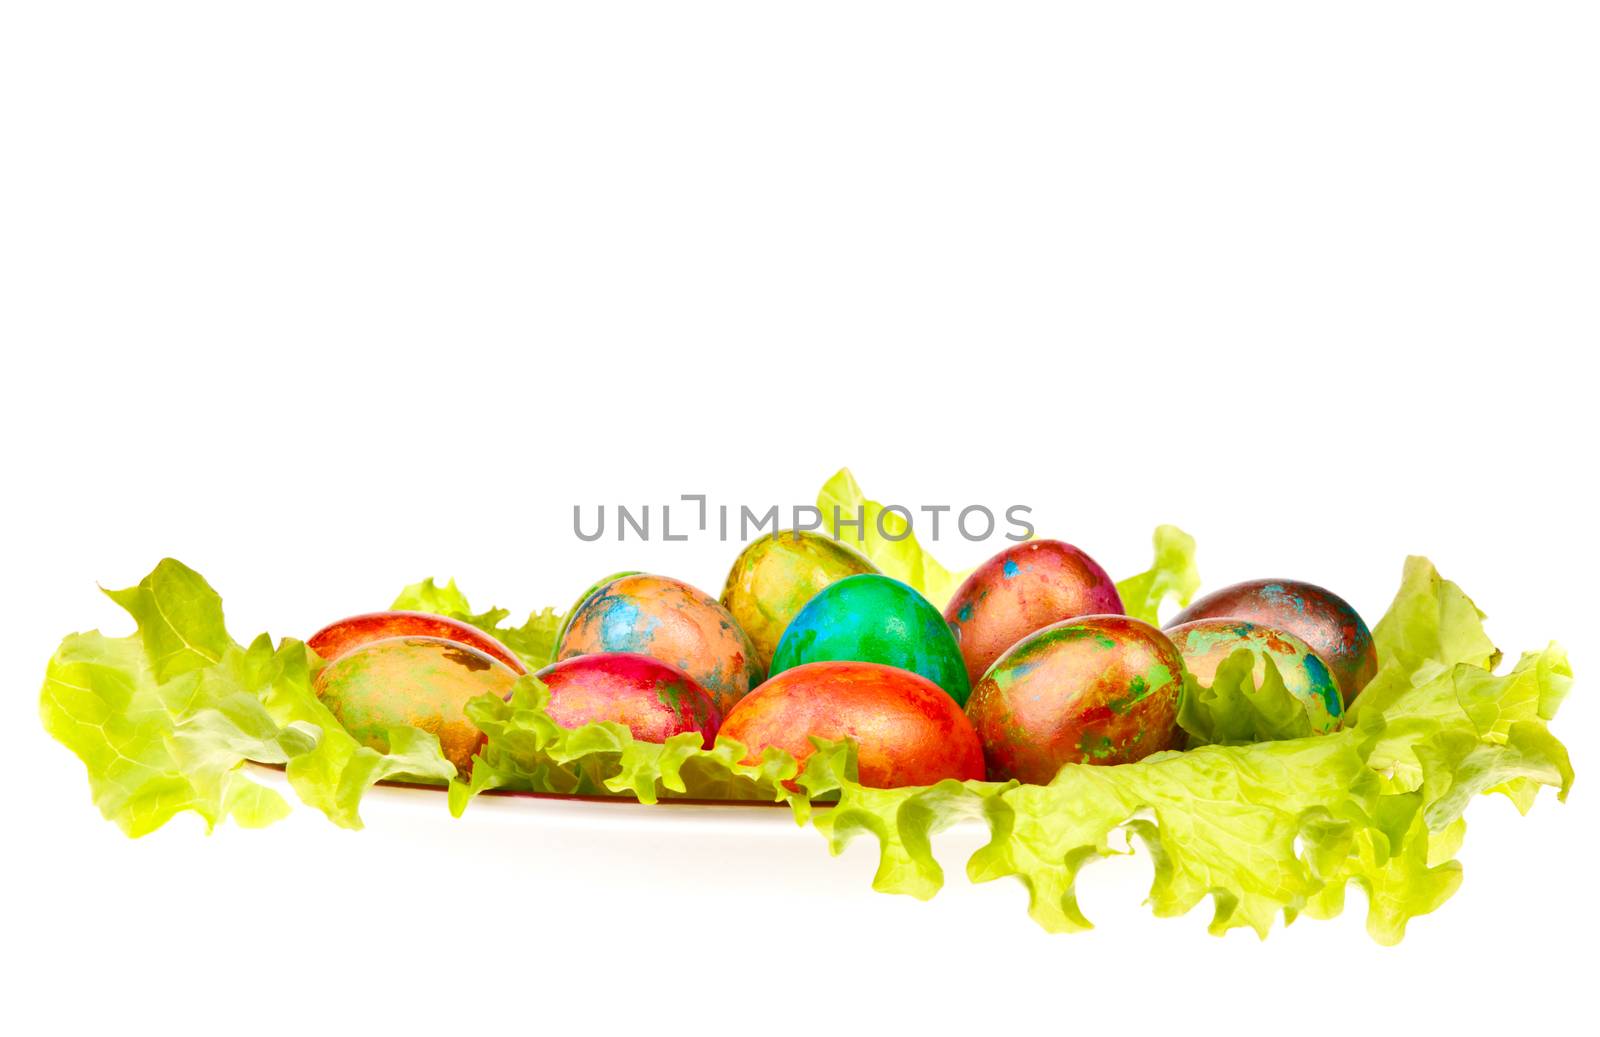 Easter eggs on a plate with green leaves